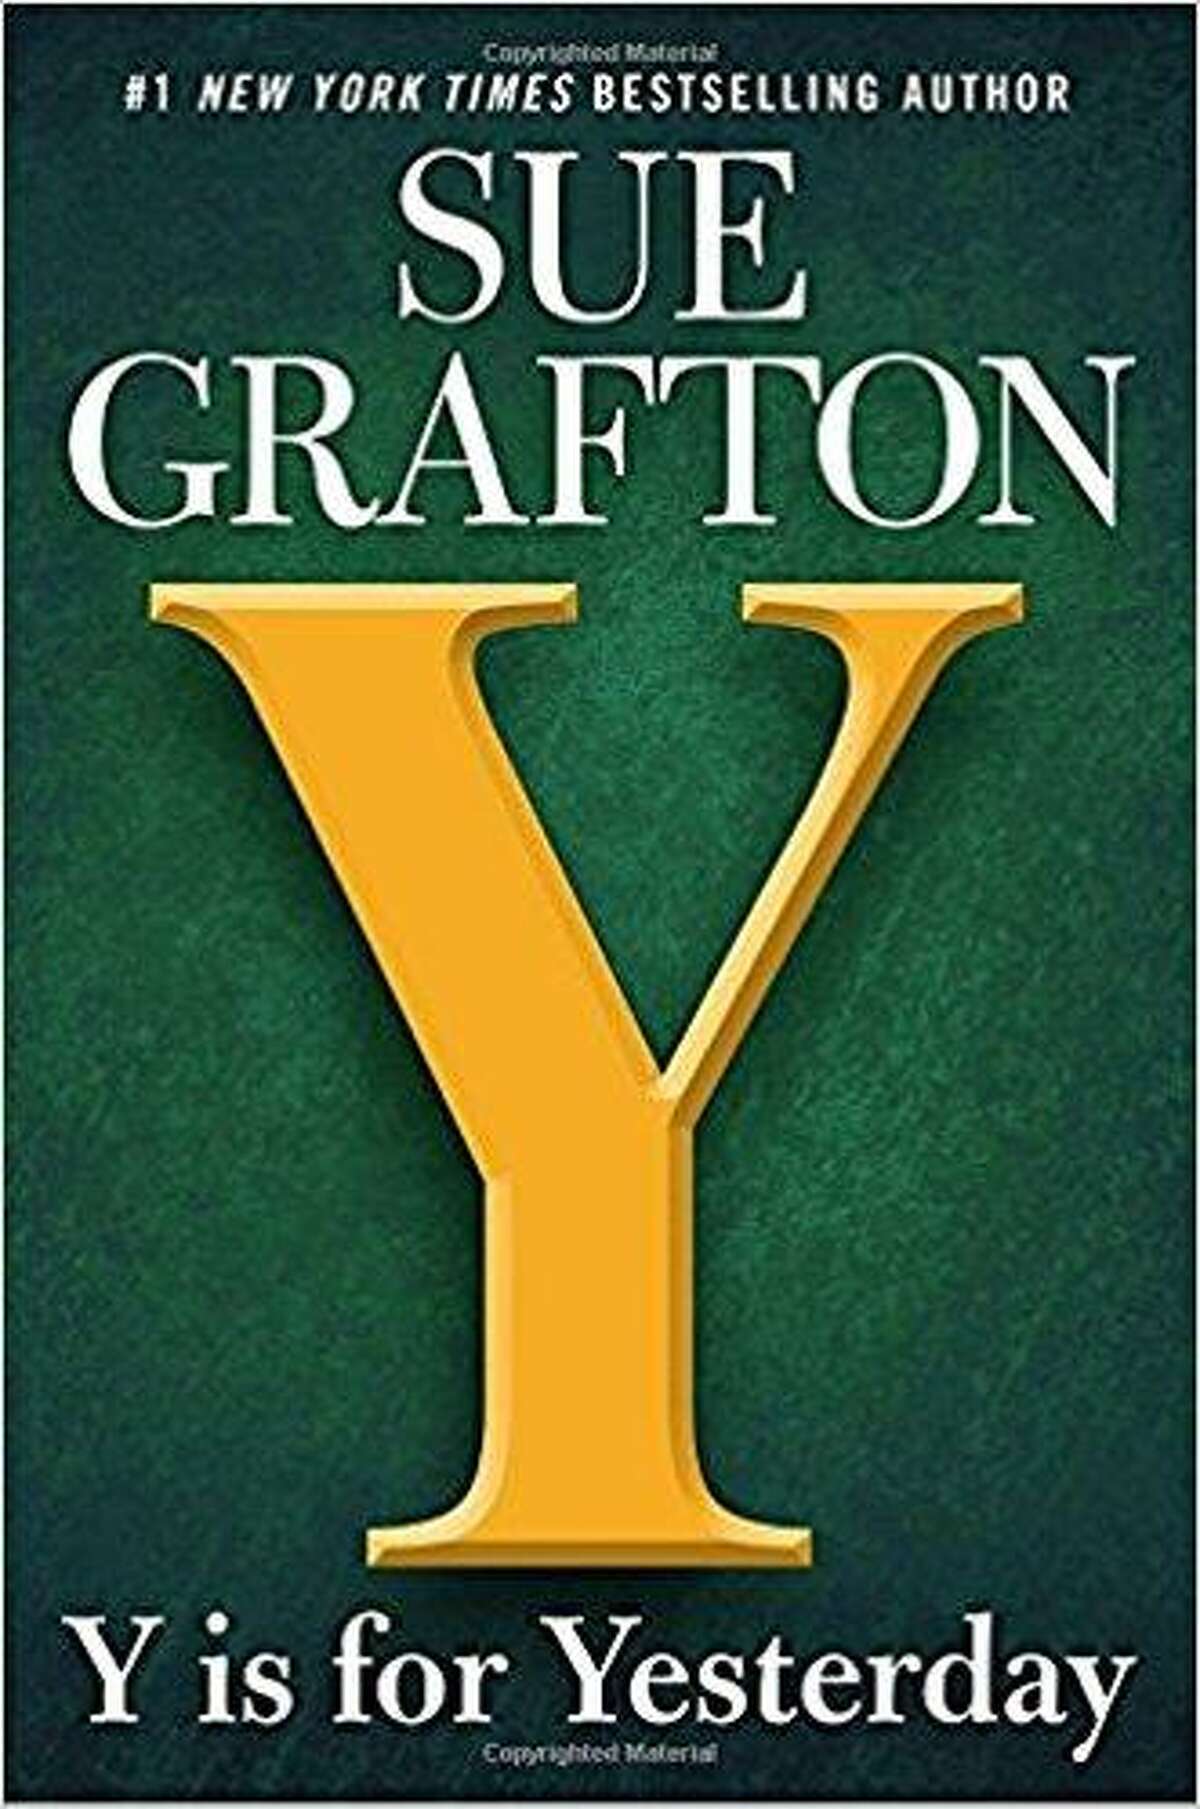 “Y Is for Yesterday” by Sue Grafton